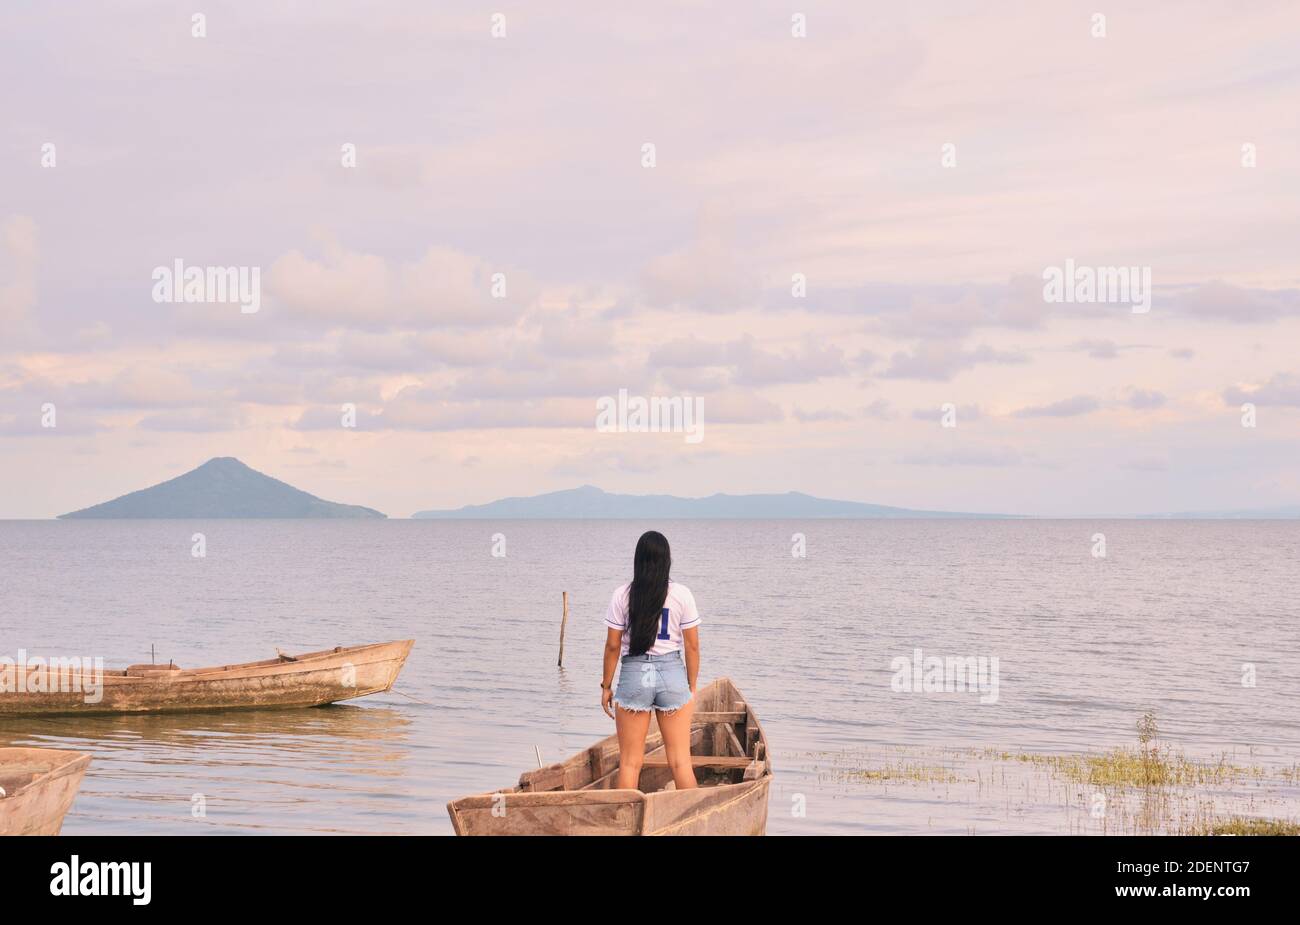 Rear view of woman looking at sky while standing on boat in the middle of lake Managua Stock Photo